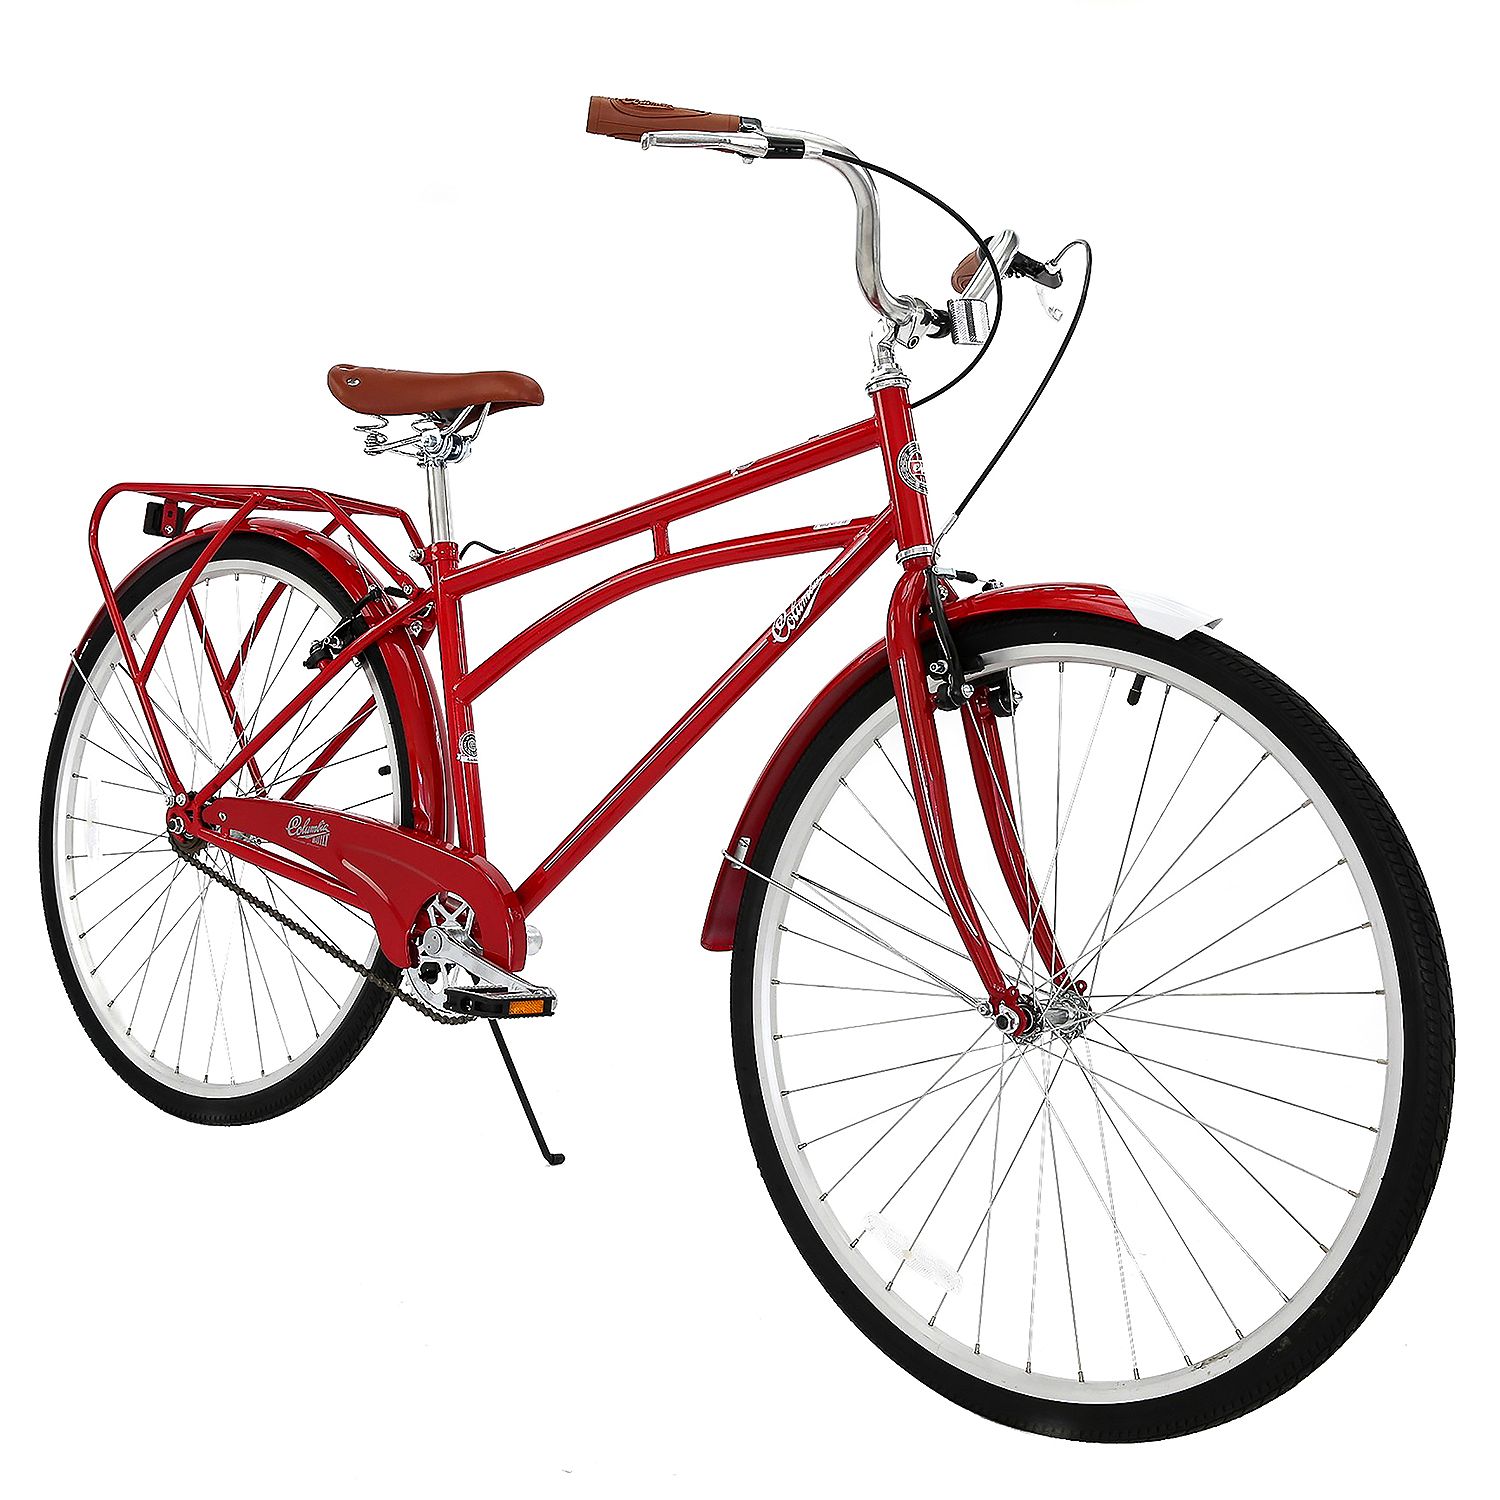 Columbia 700C Archbar men’s bicycle for $90, free shipping